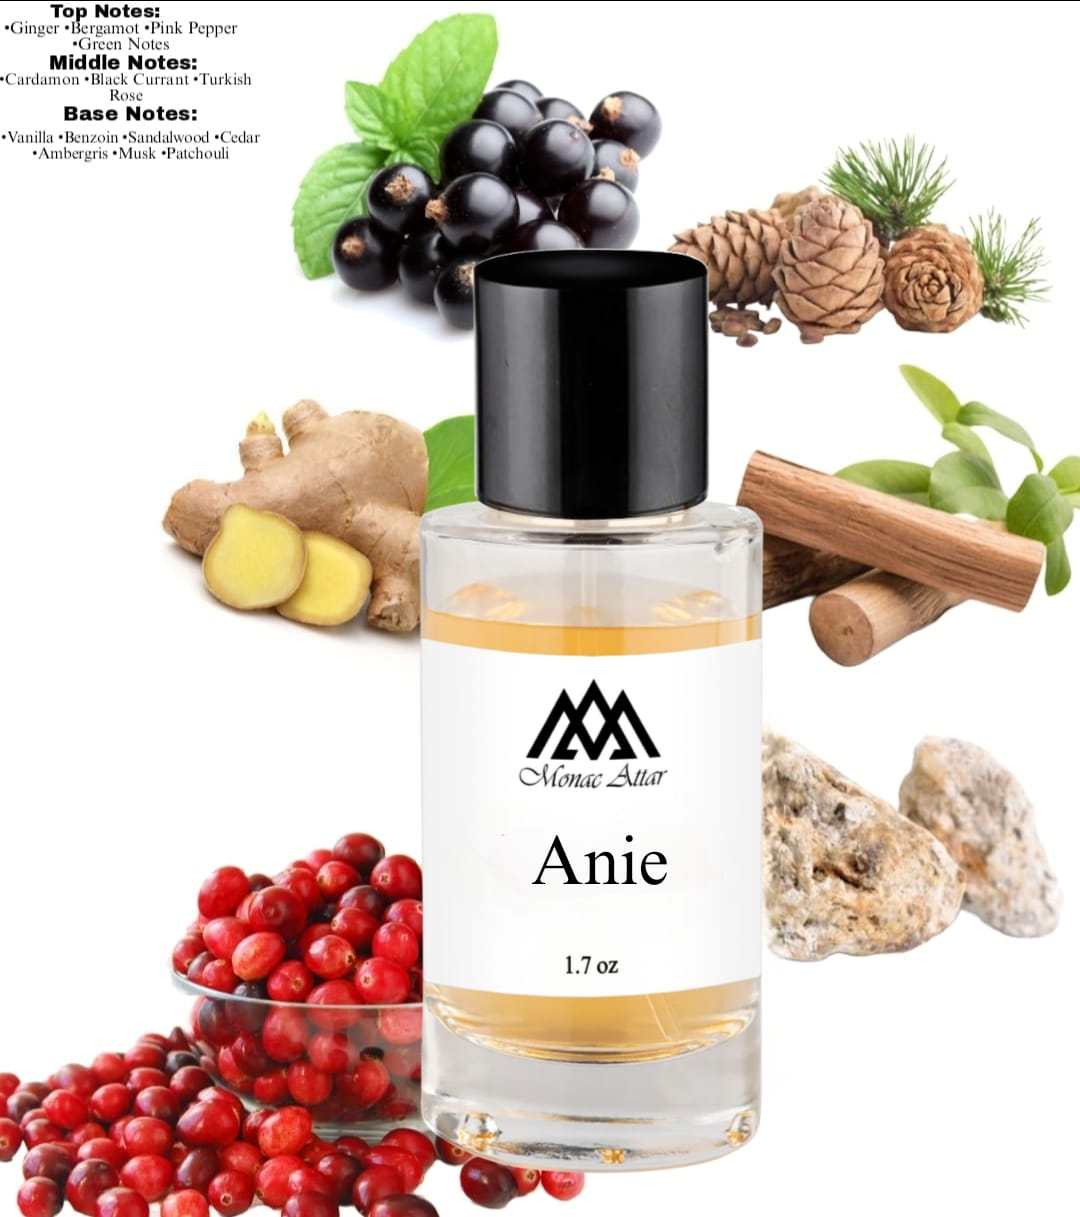 Nishane Ani dupe, clone, luxury scent, amber, floral unisex fragrance Notes and Accords